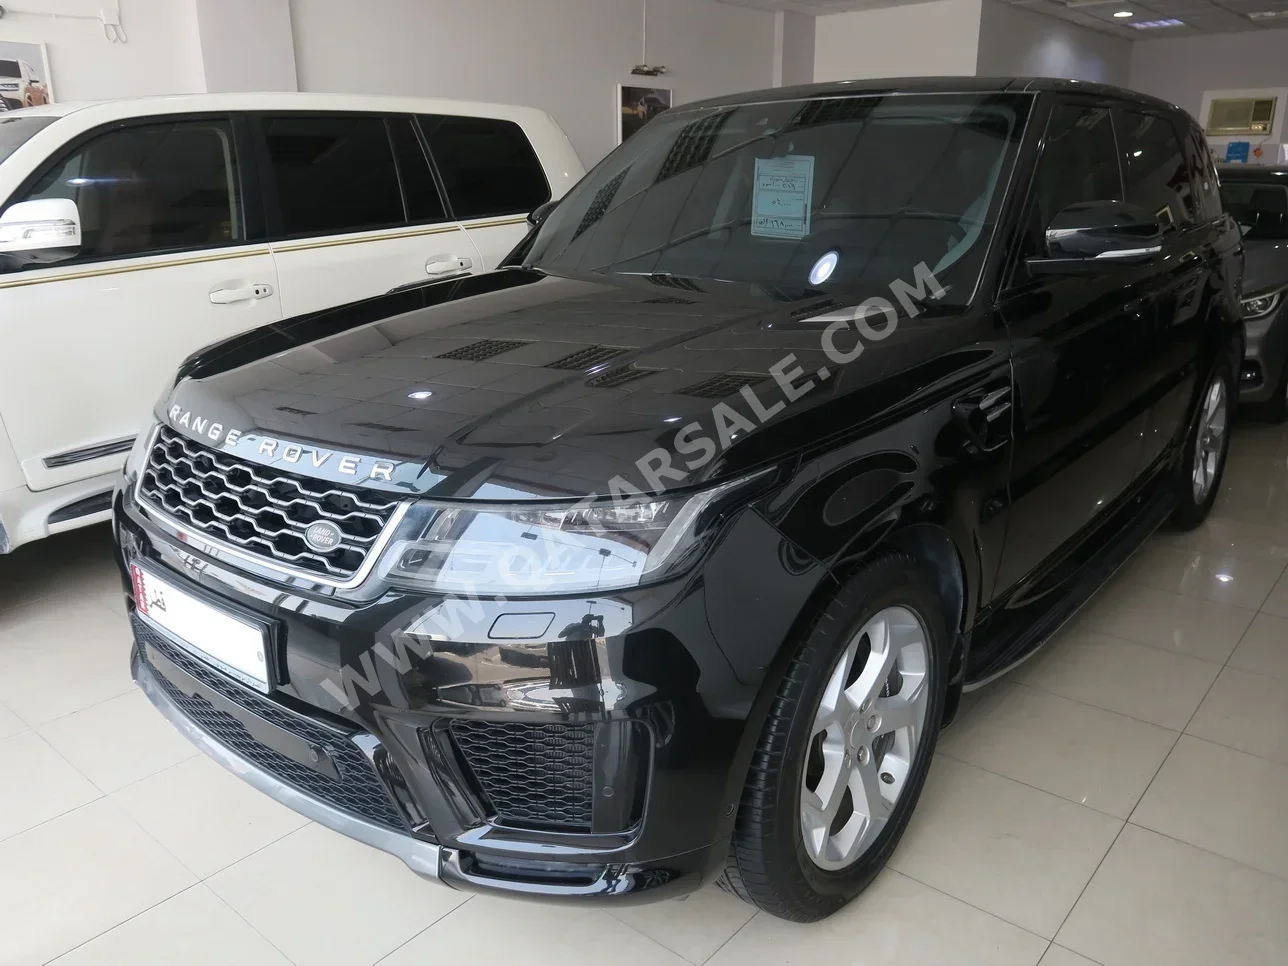 Land Rover  Range Rover  Sport Super charged  2019  Automatic  54,000 Km  6 Cylinder  Four Wheel Drive (4WD)  SUV  Black